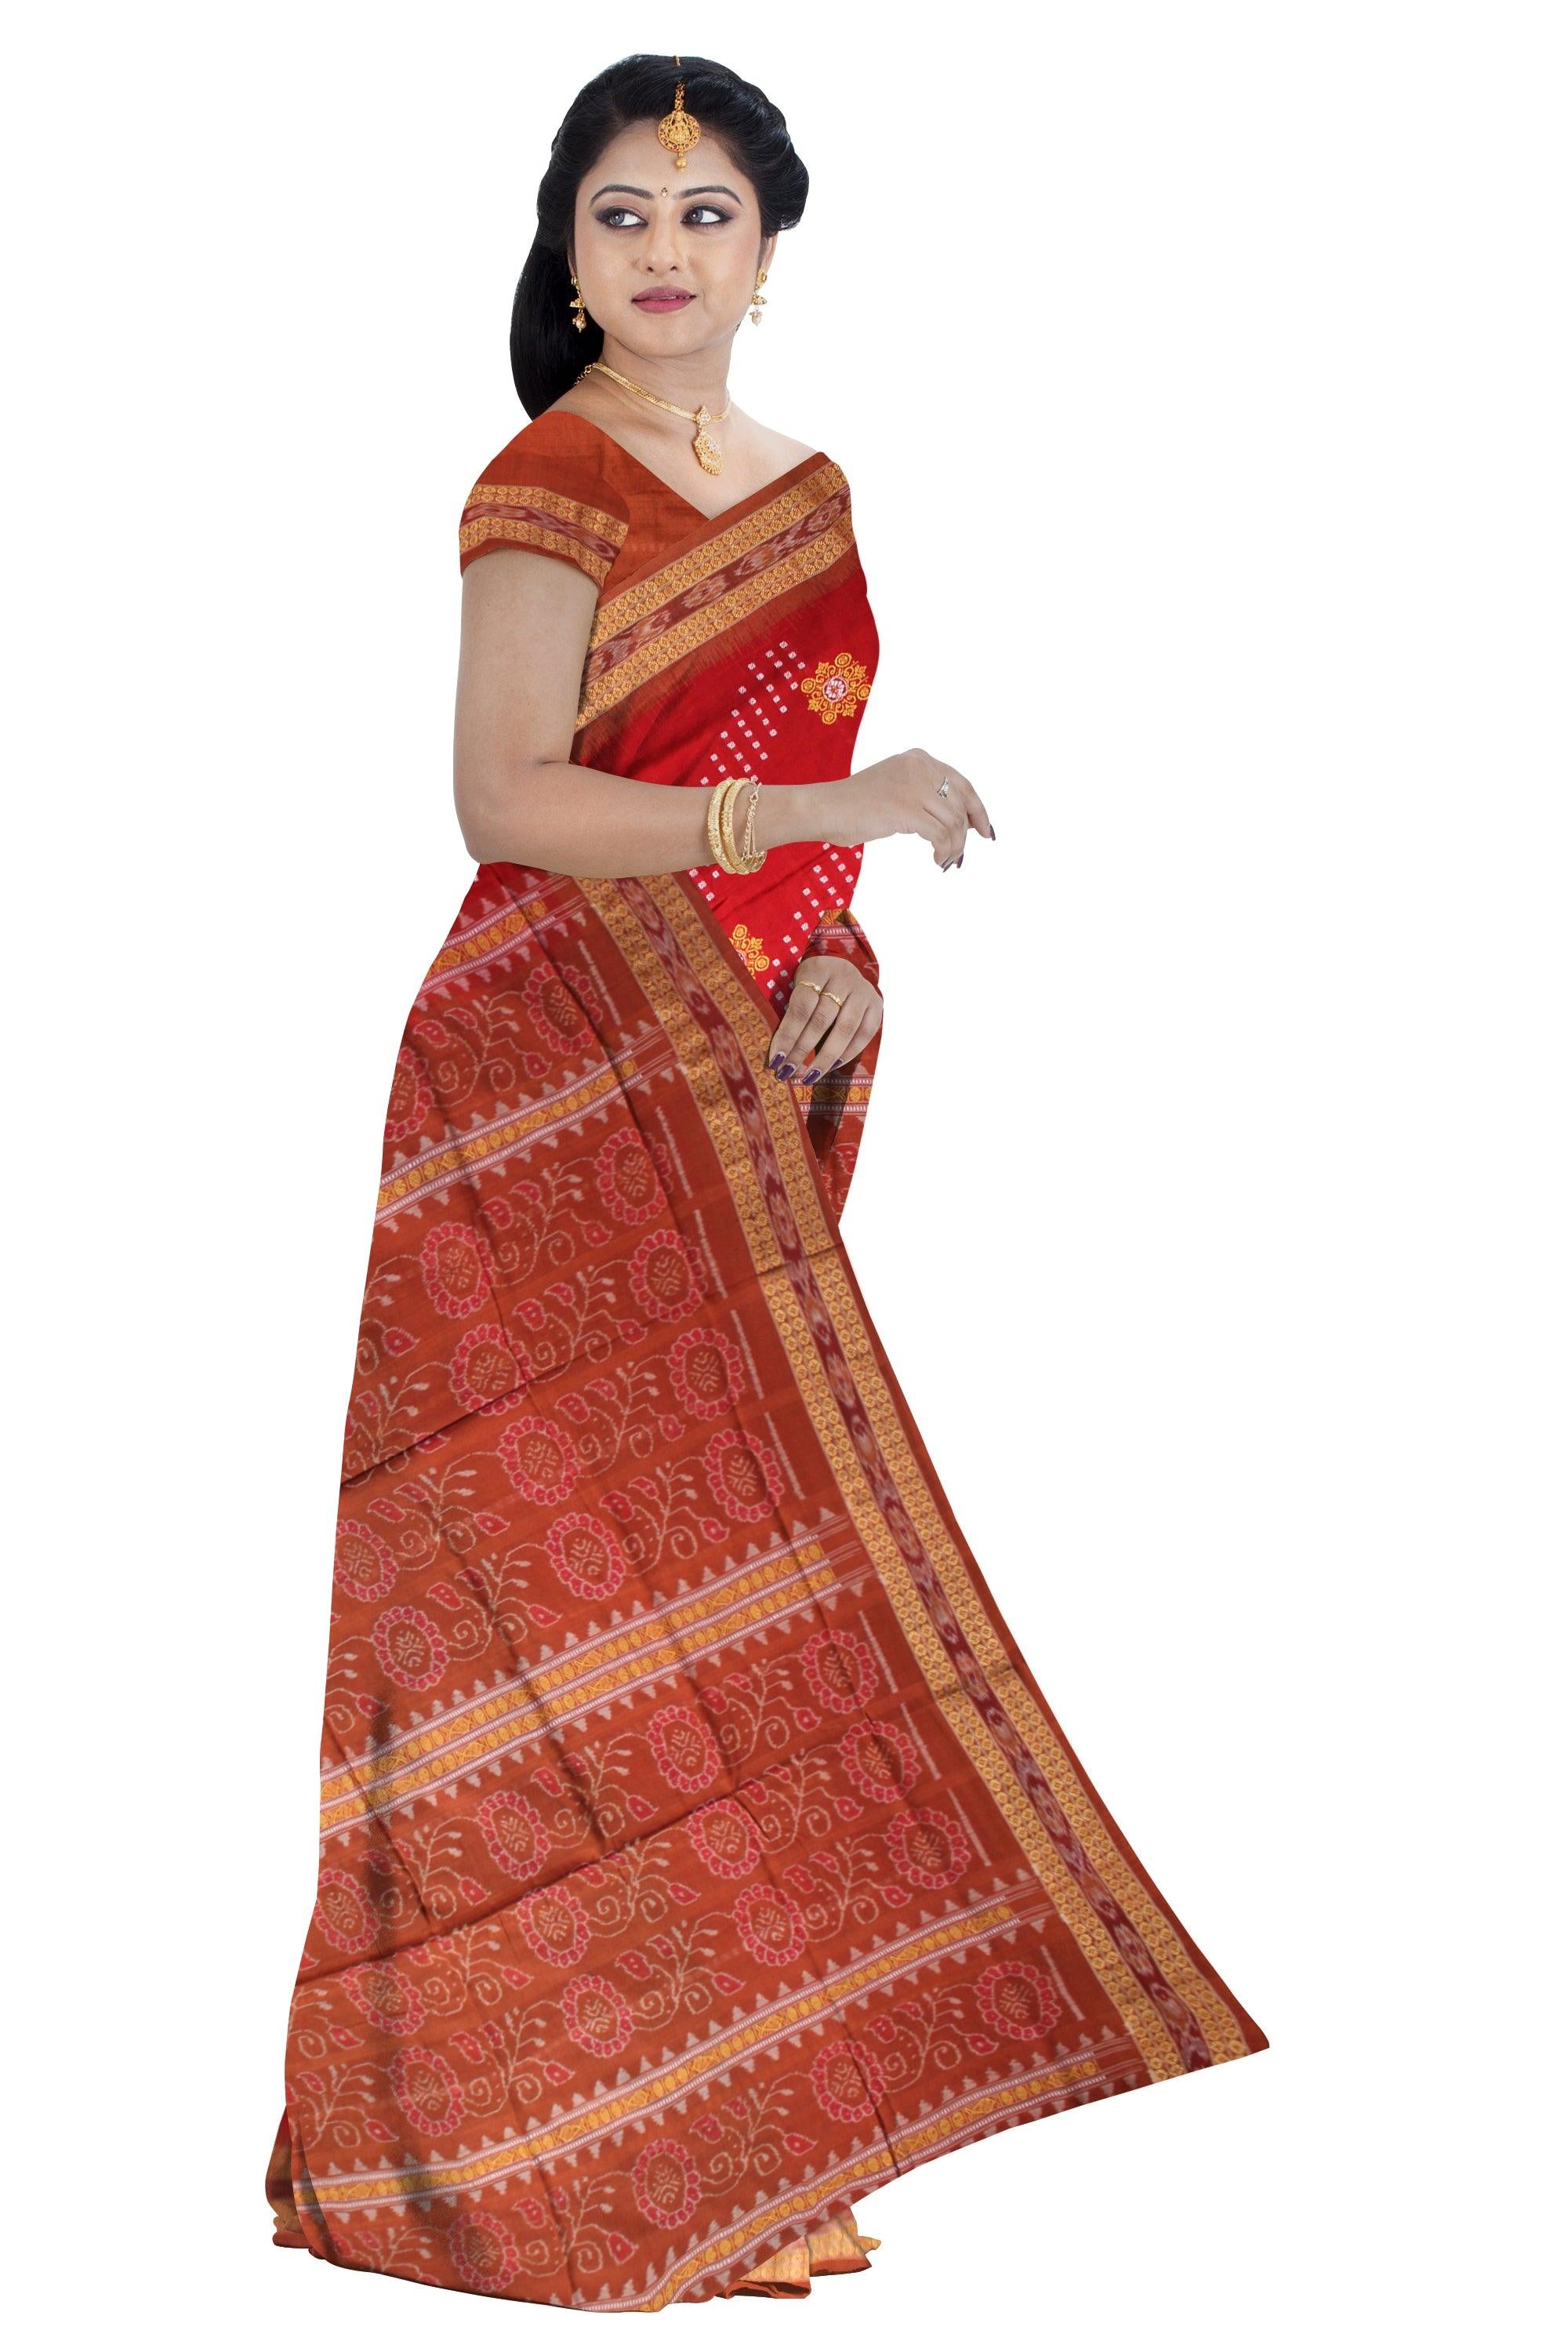 RED AND GREEN COLOR  TRADITIONAL FLOWER PATTERN COTTON SAREE , WITH BLOUSE PIECE. - Koshali Arts & Crafts Enterprise